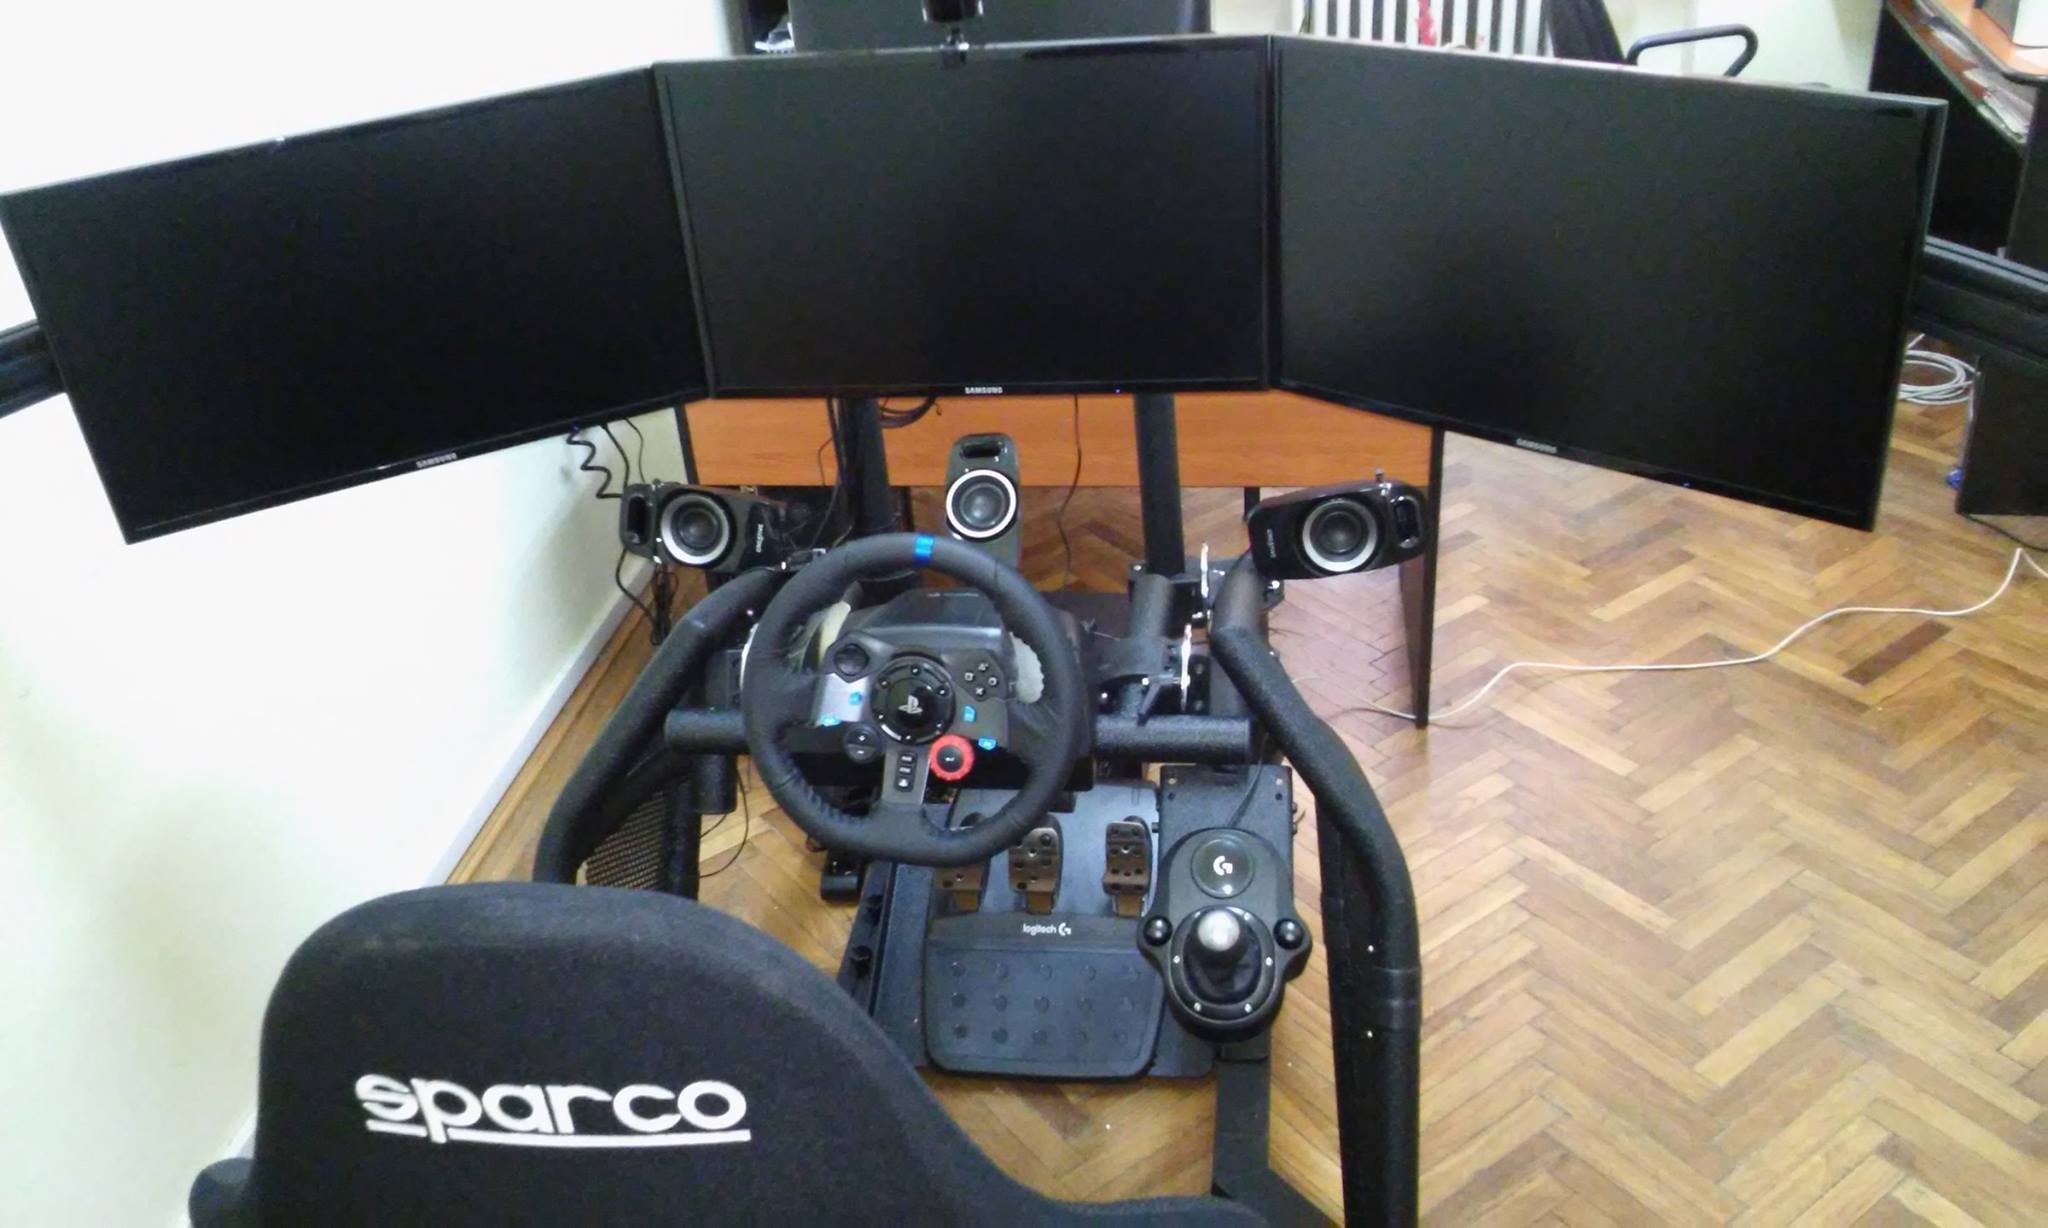 Carnetsoft driving simulator for research and testing